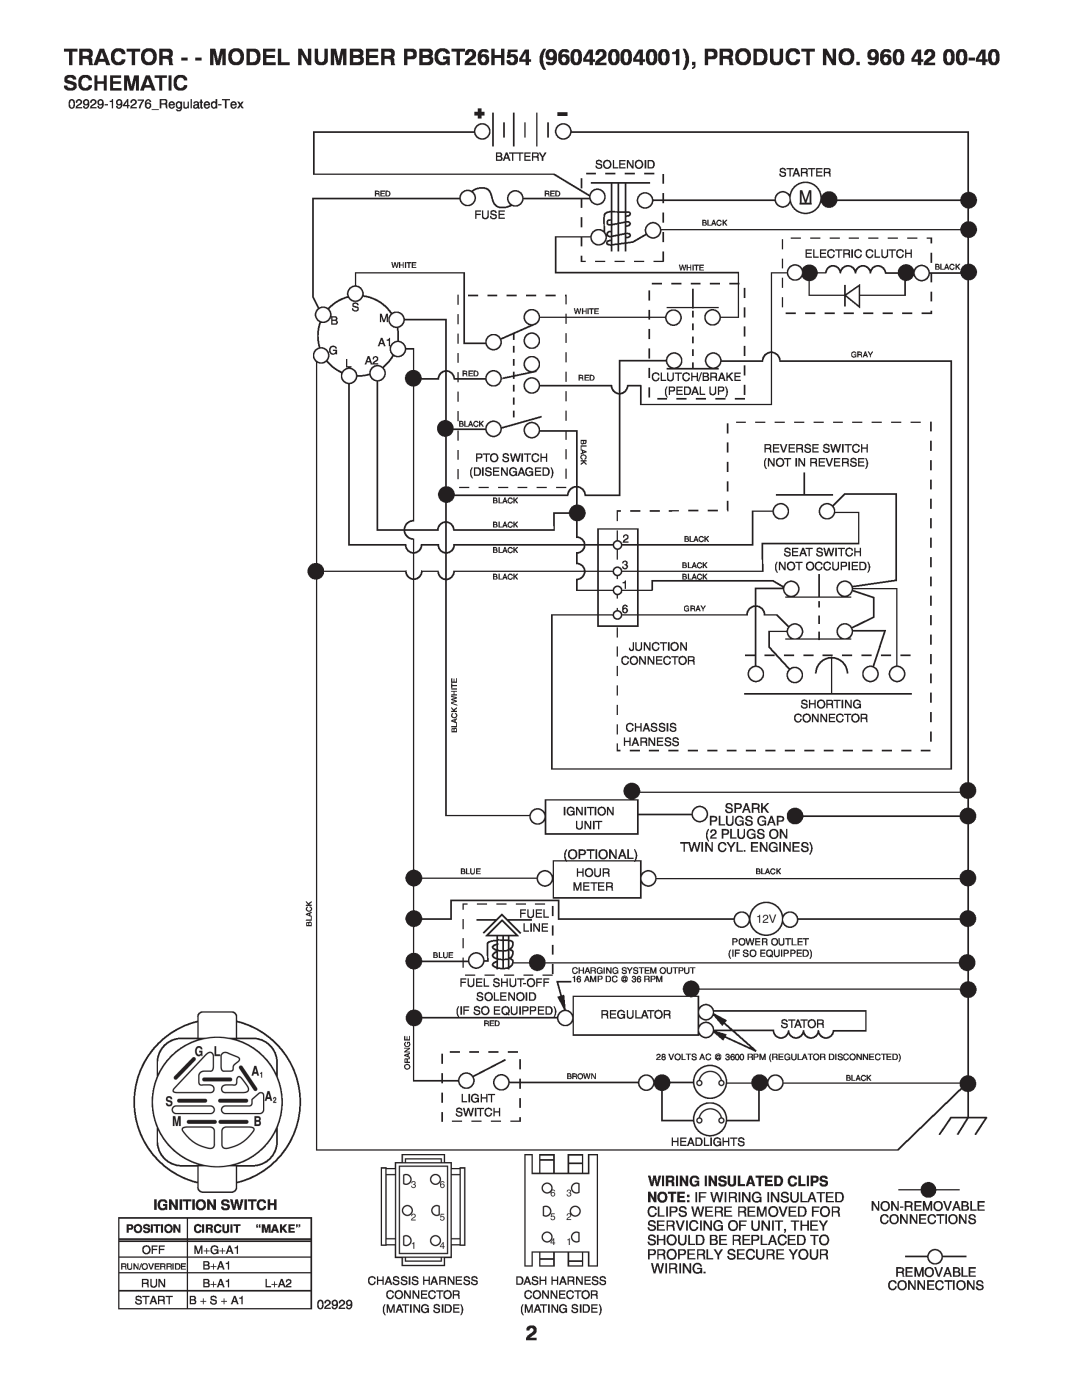 Poulan TRACTOR - - MODEL NUMBER PBGT26H54 96042004001, PRODUCT NO. 960, Schematic, Ignition Switch, Wiring, Optional 